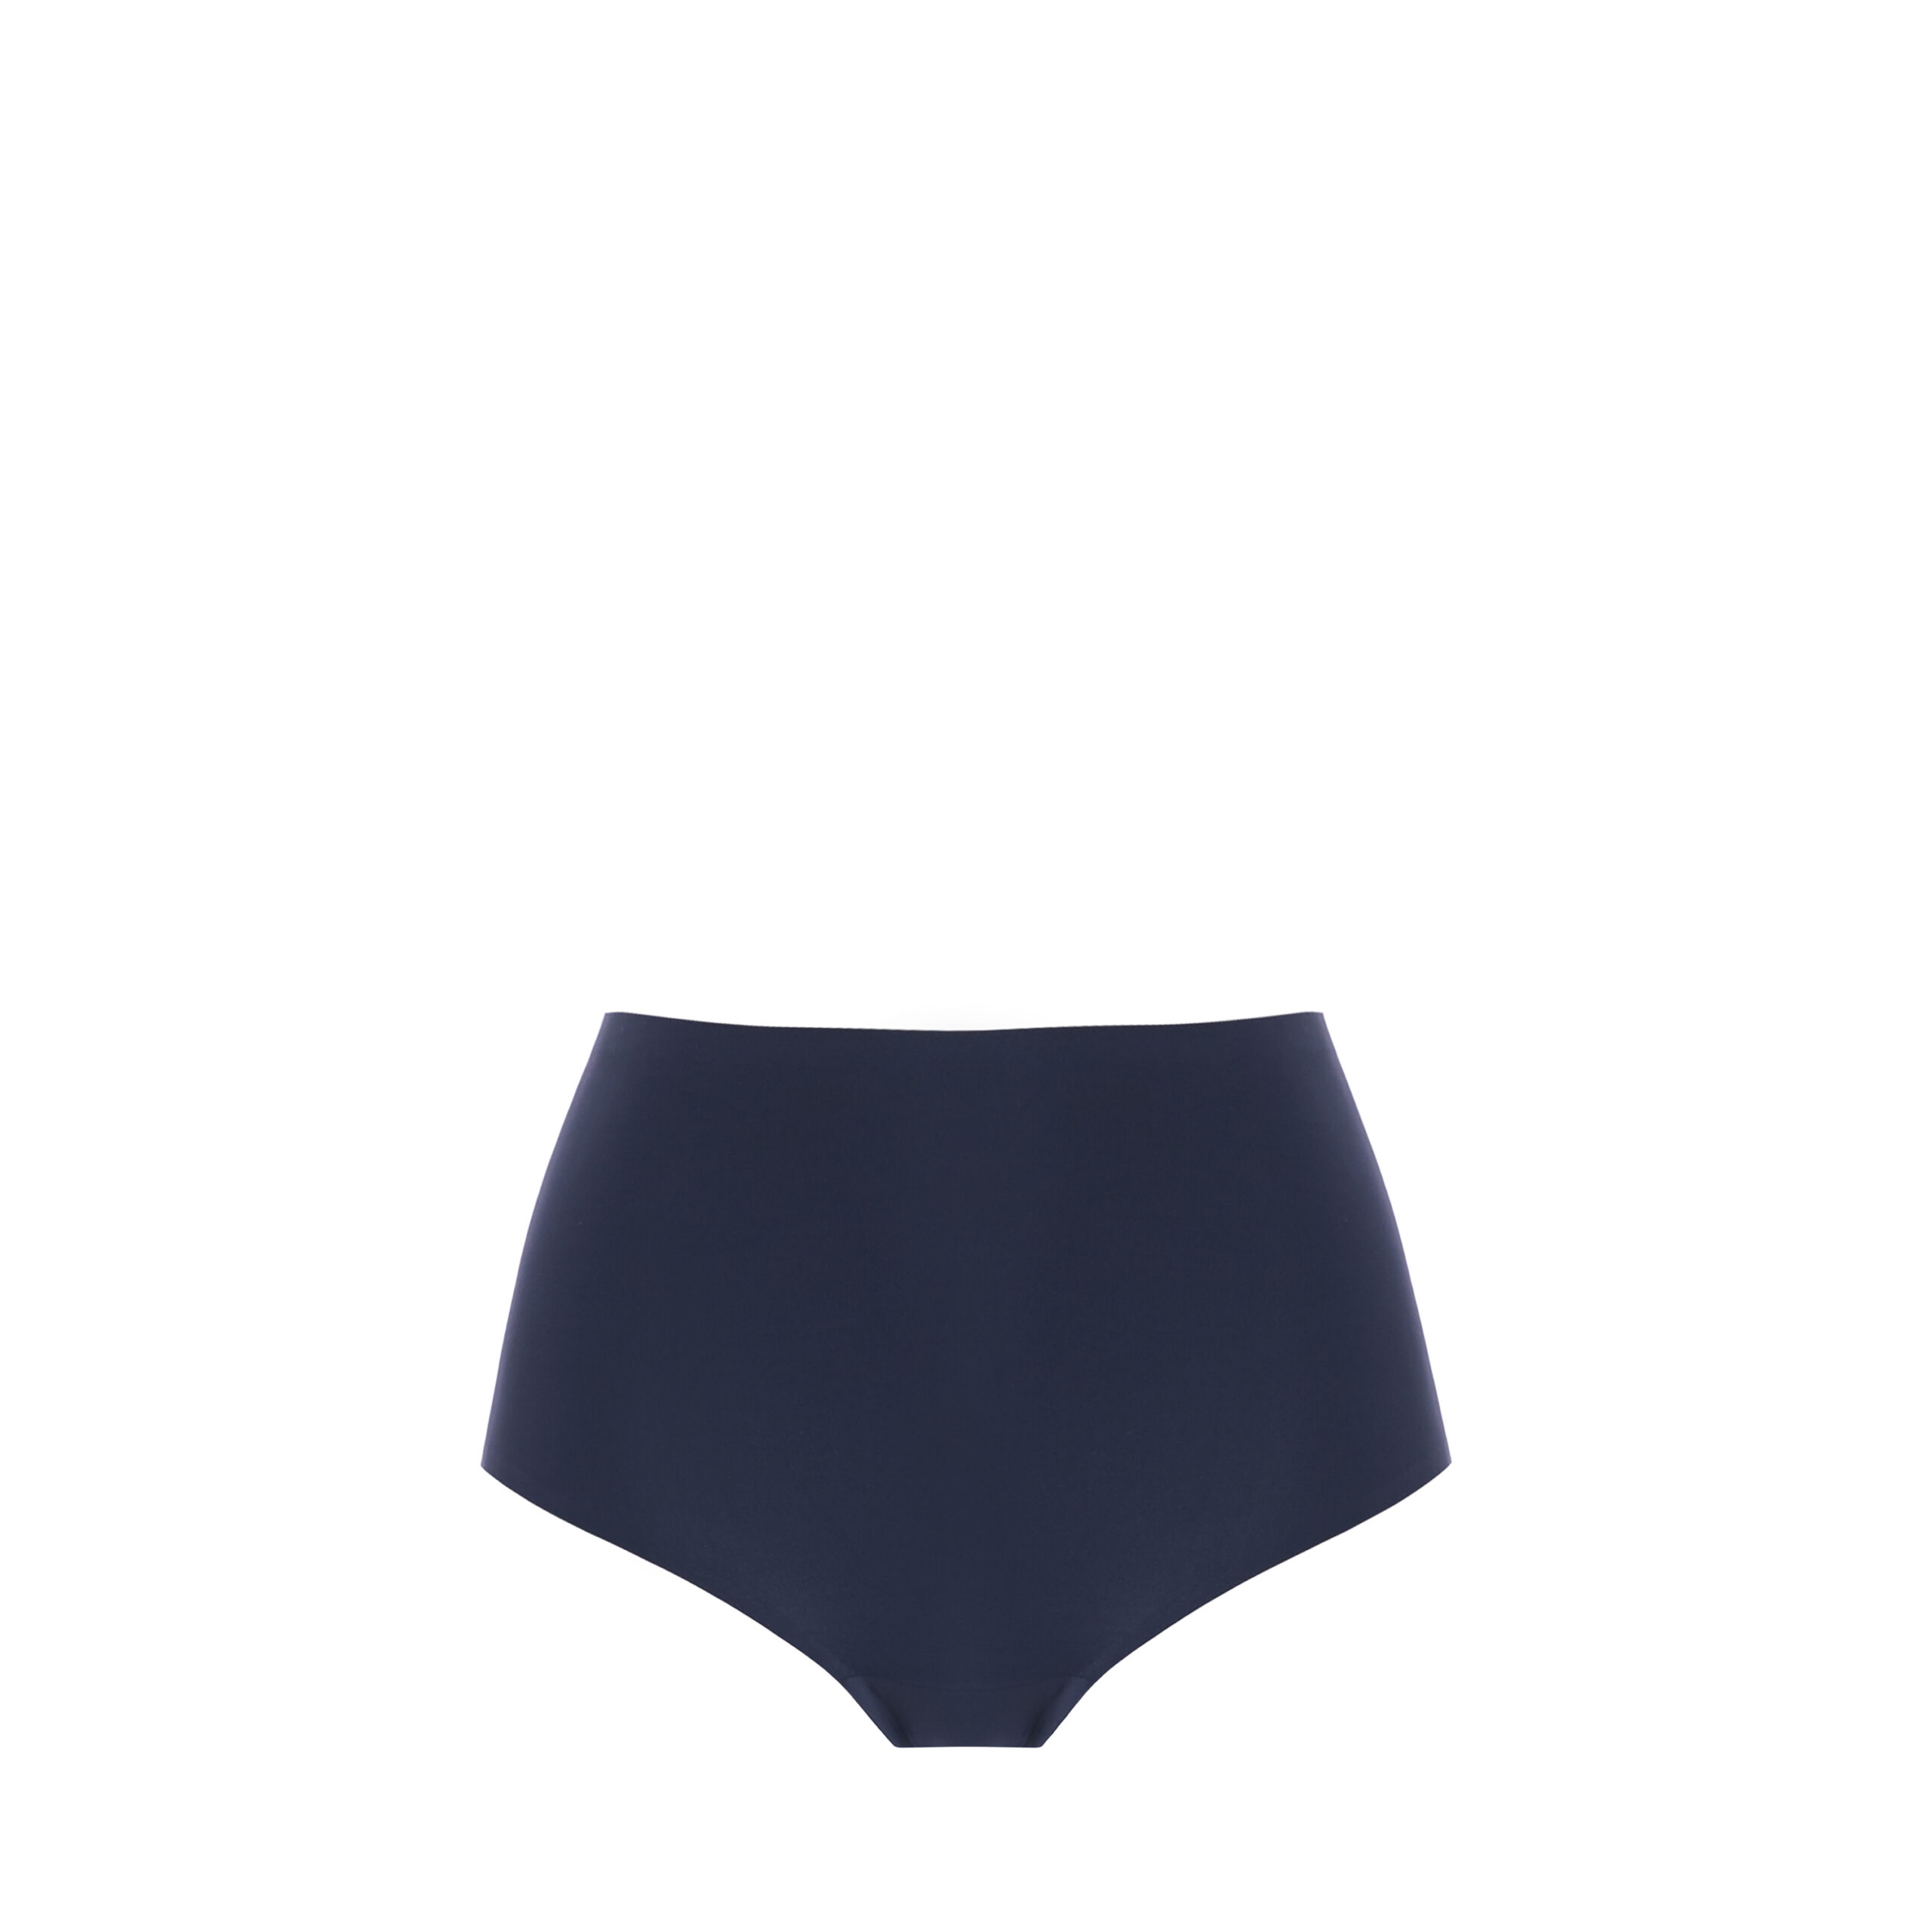 FANTASIE SMOOTHEASE INVISIBLE STRETCH FULL BRIEF NAVY 